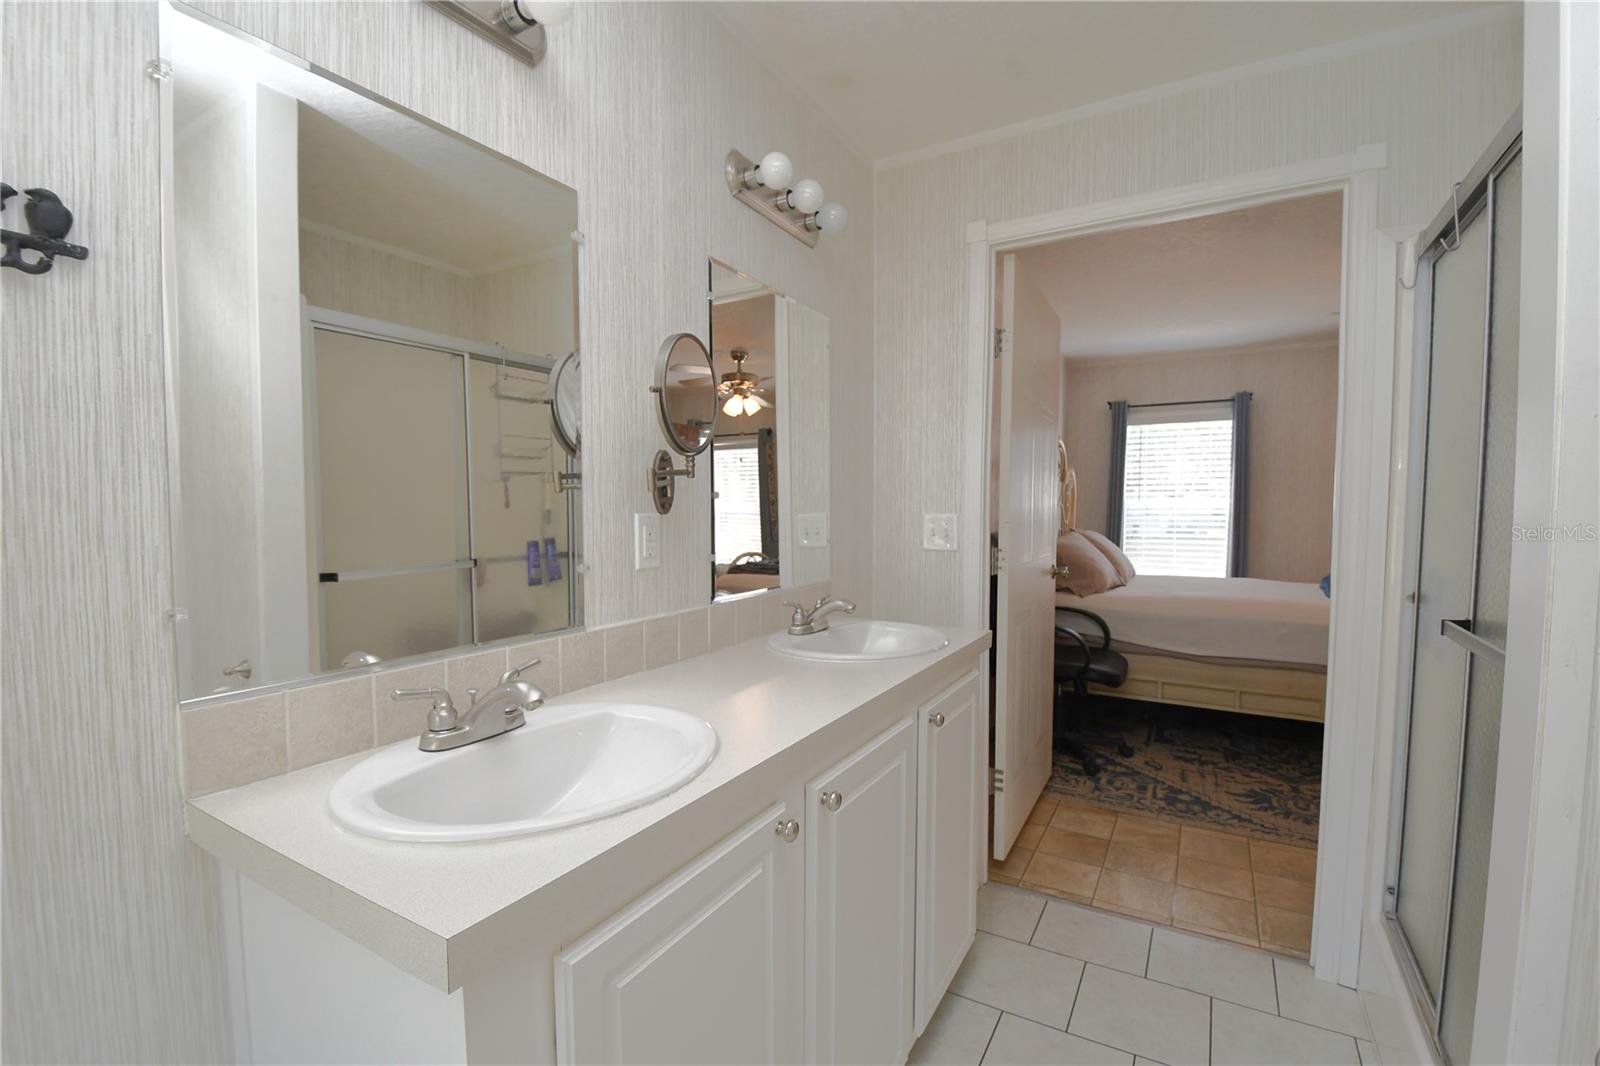 The ensuite, just steps from the master bedroom, has a walk-in shower.